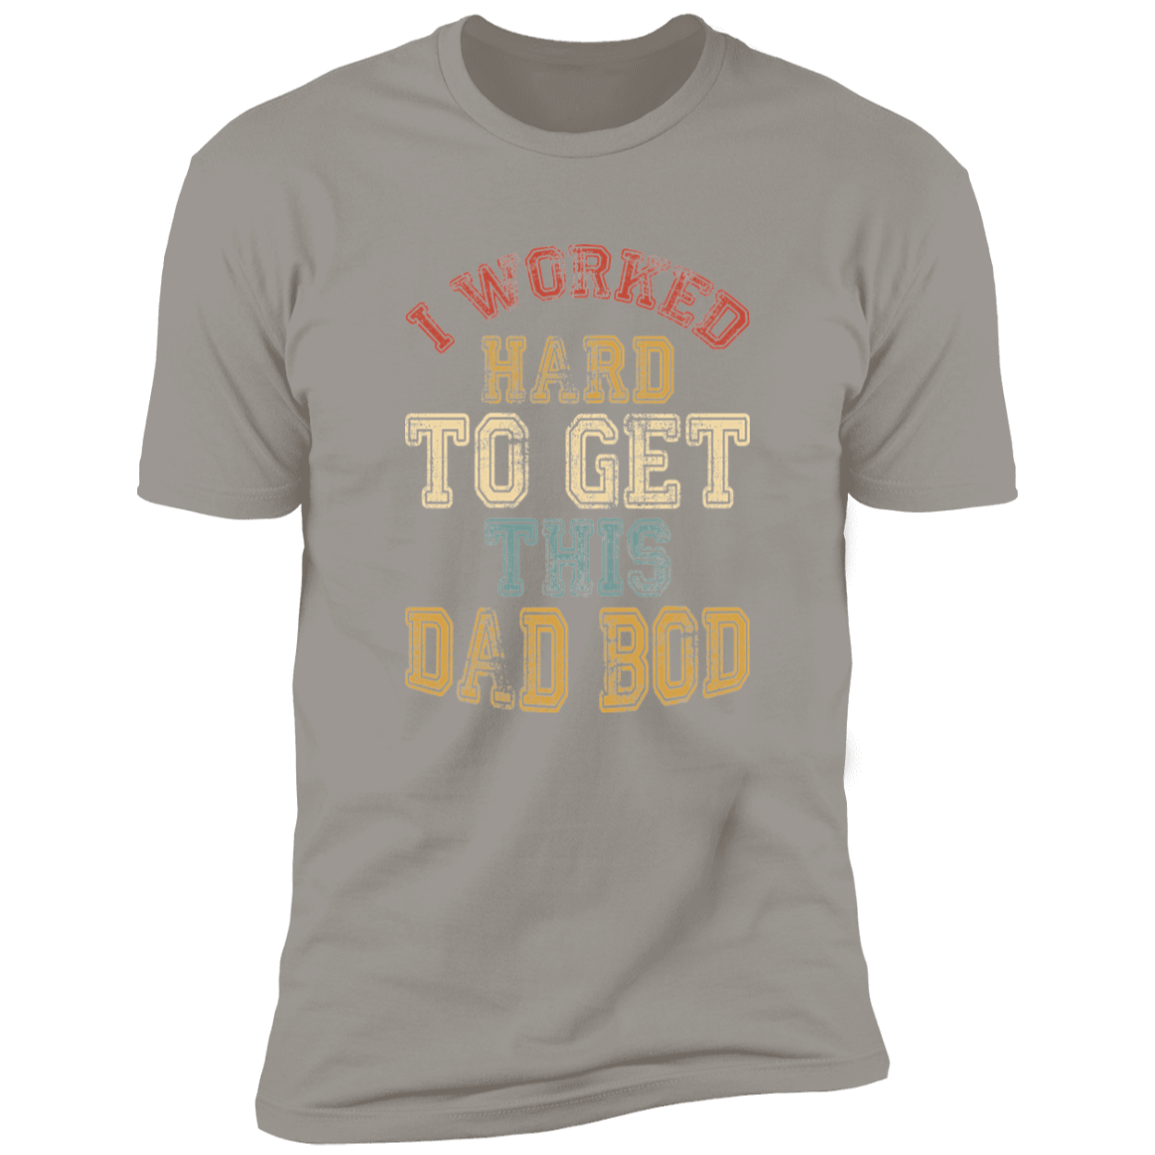 I Worked Hard To Get This Dad Bod |  Premium Short Sleeve Tee